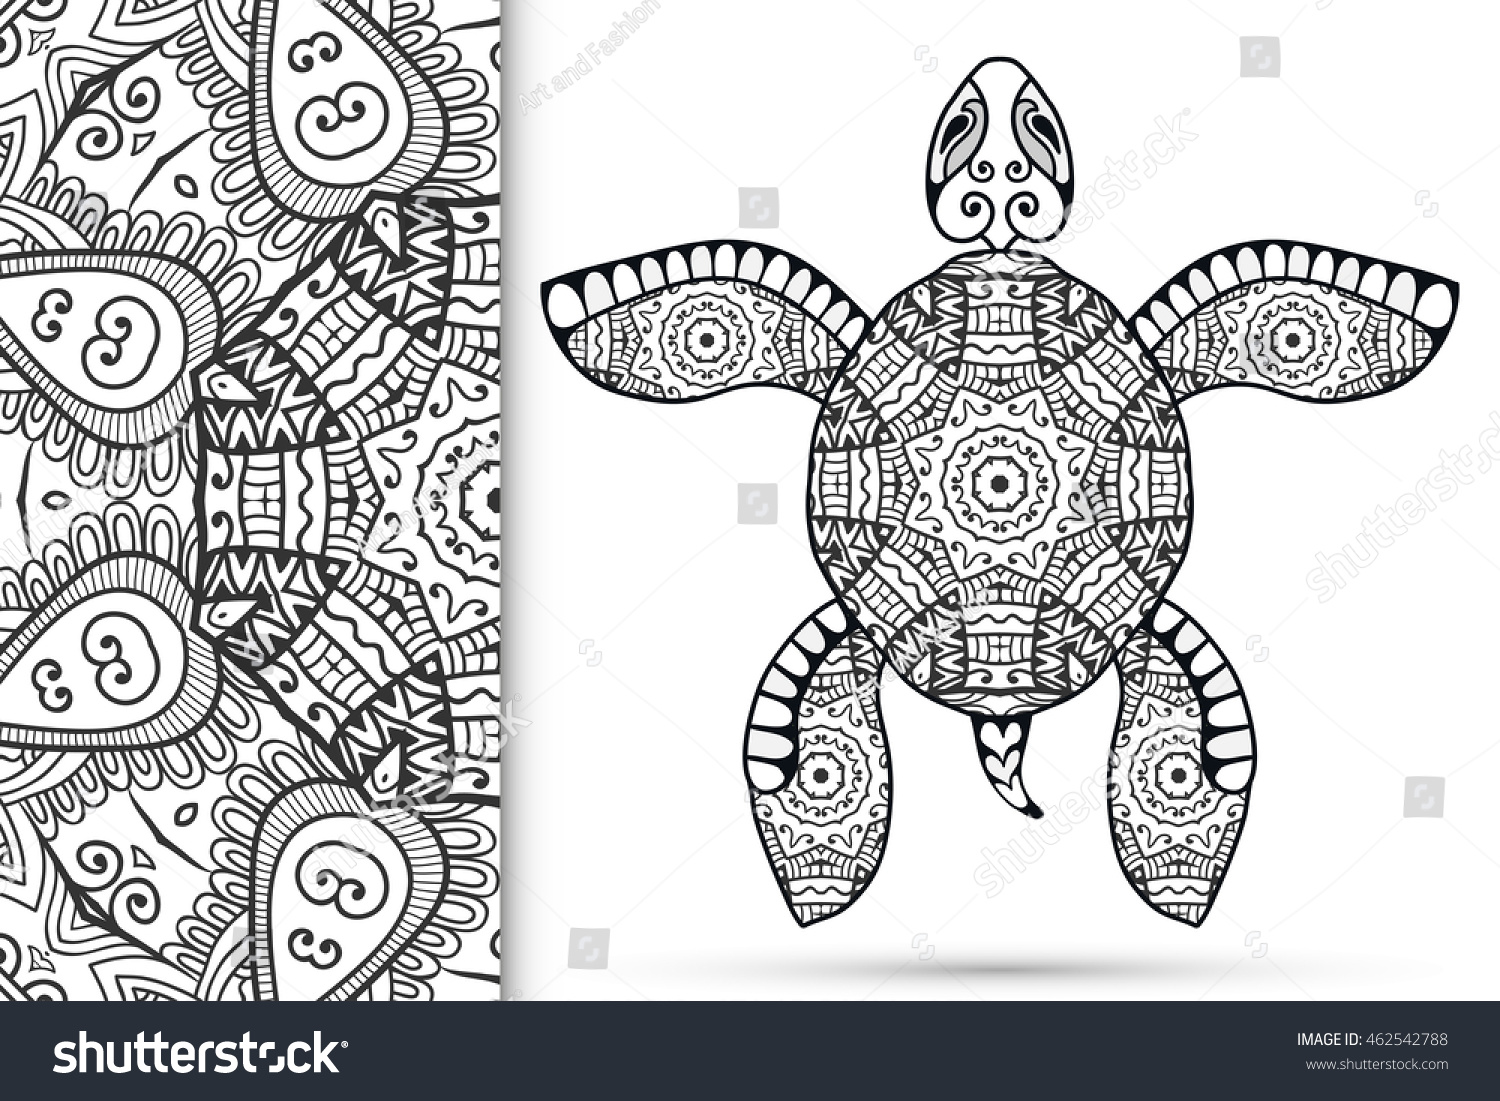 SVG of Decorative stylized sketch turtle and seamless mandala geometric pattern, vector tribal totem animal, isolated element on white background. Zentangle style art for coloring book page. svg